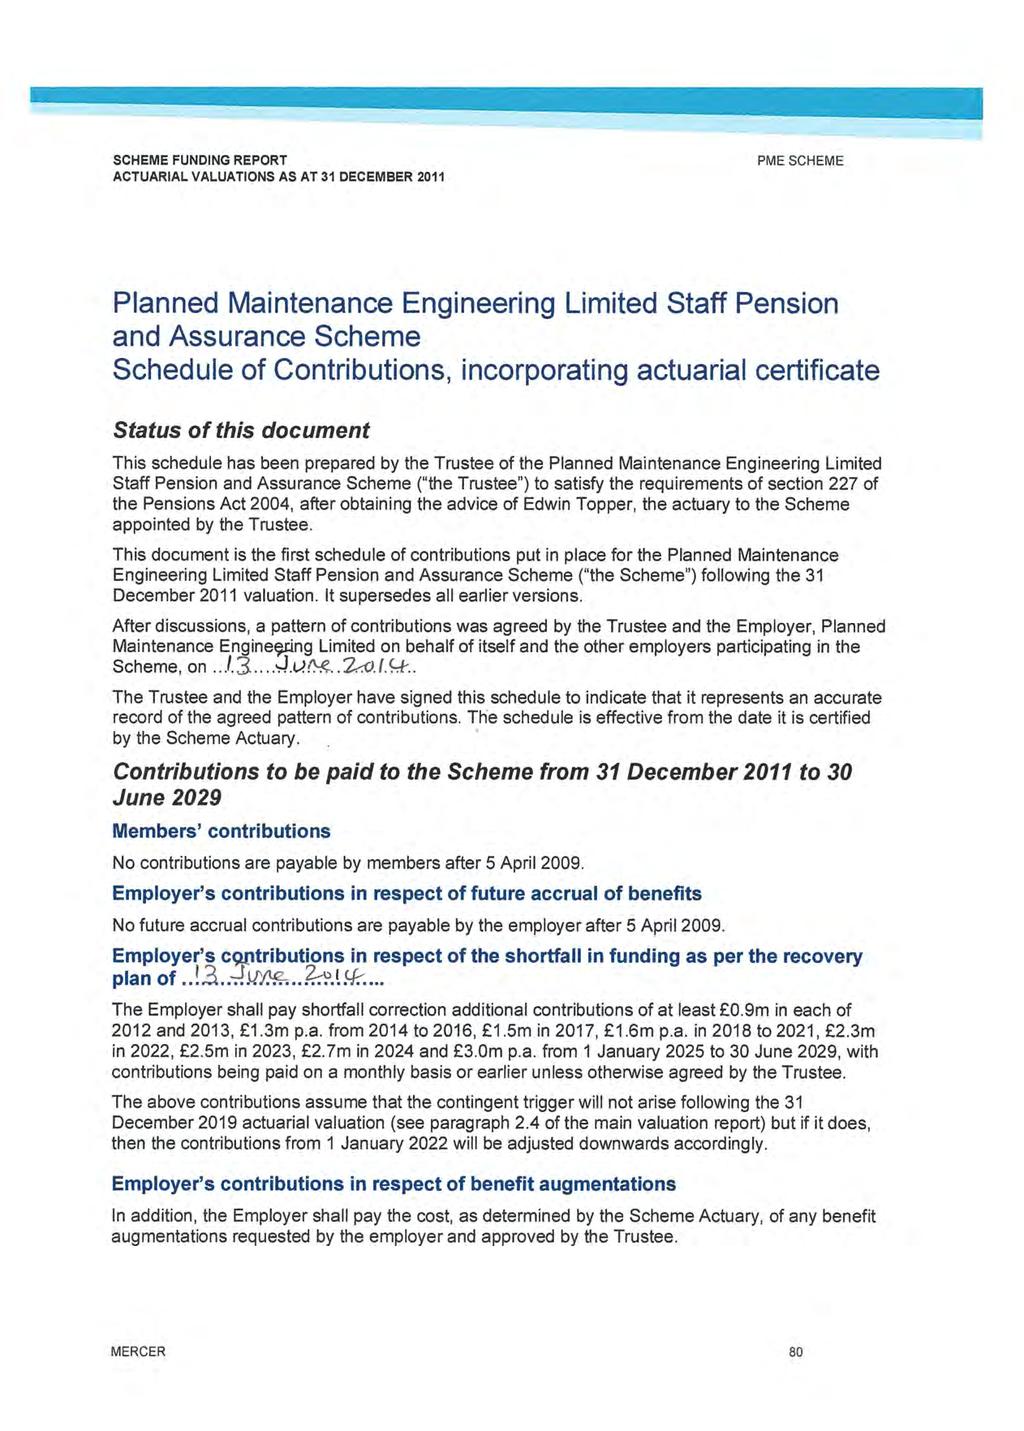 PMESCHEME Planned Maintenance Engineering Limited Staff Pension and Assurance Scheme Schedule of Contributions, incorporating actuarial certificate Status of this document This schedule has been